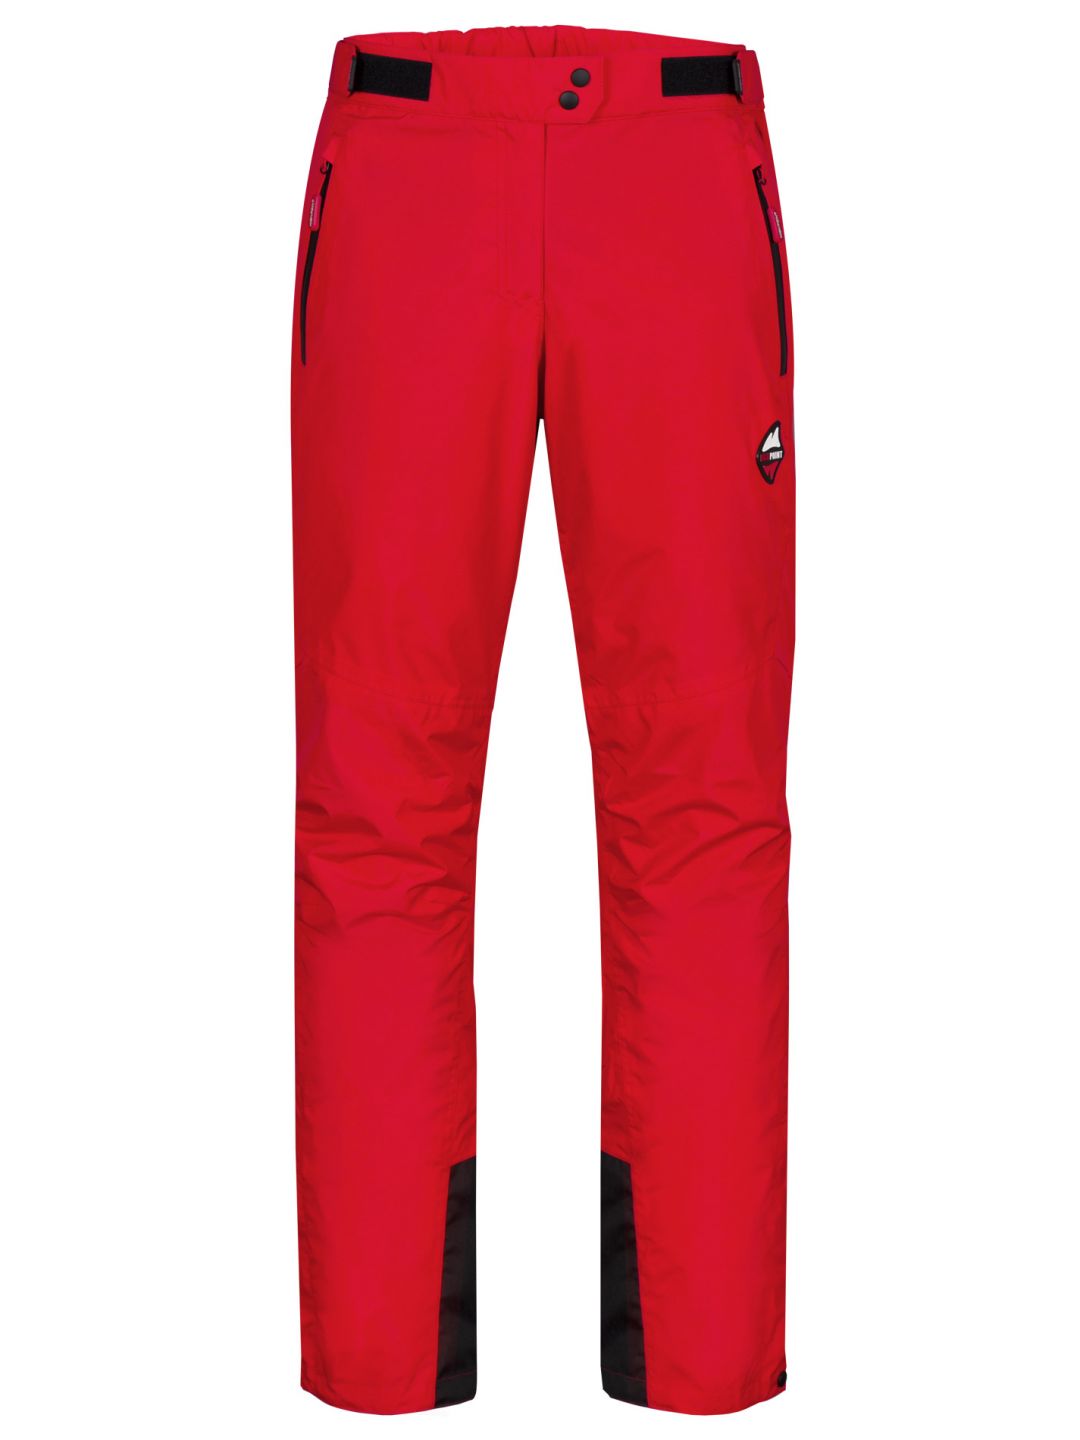 HIGH POINT Coral 2.0 Lady Pants red varianta: M